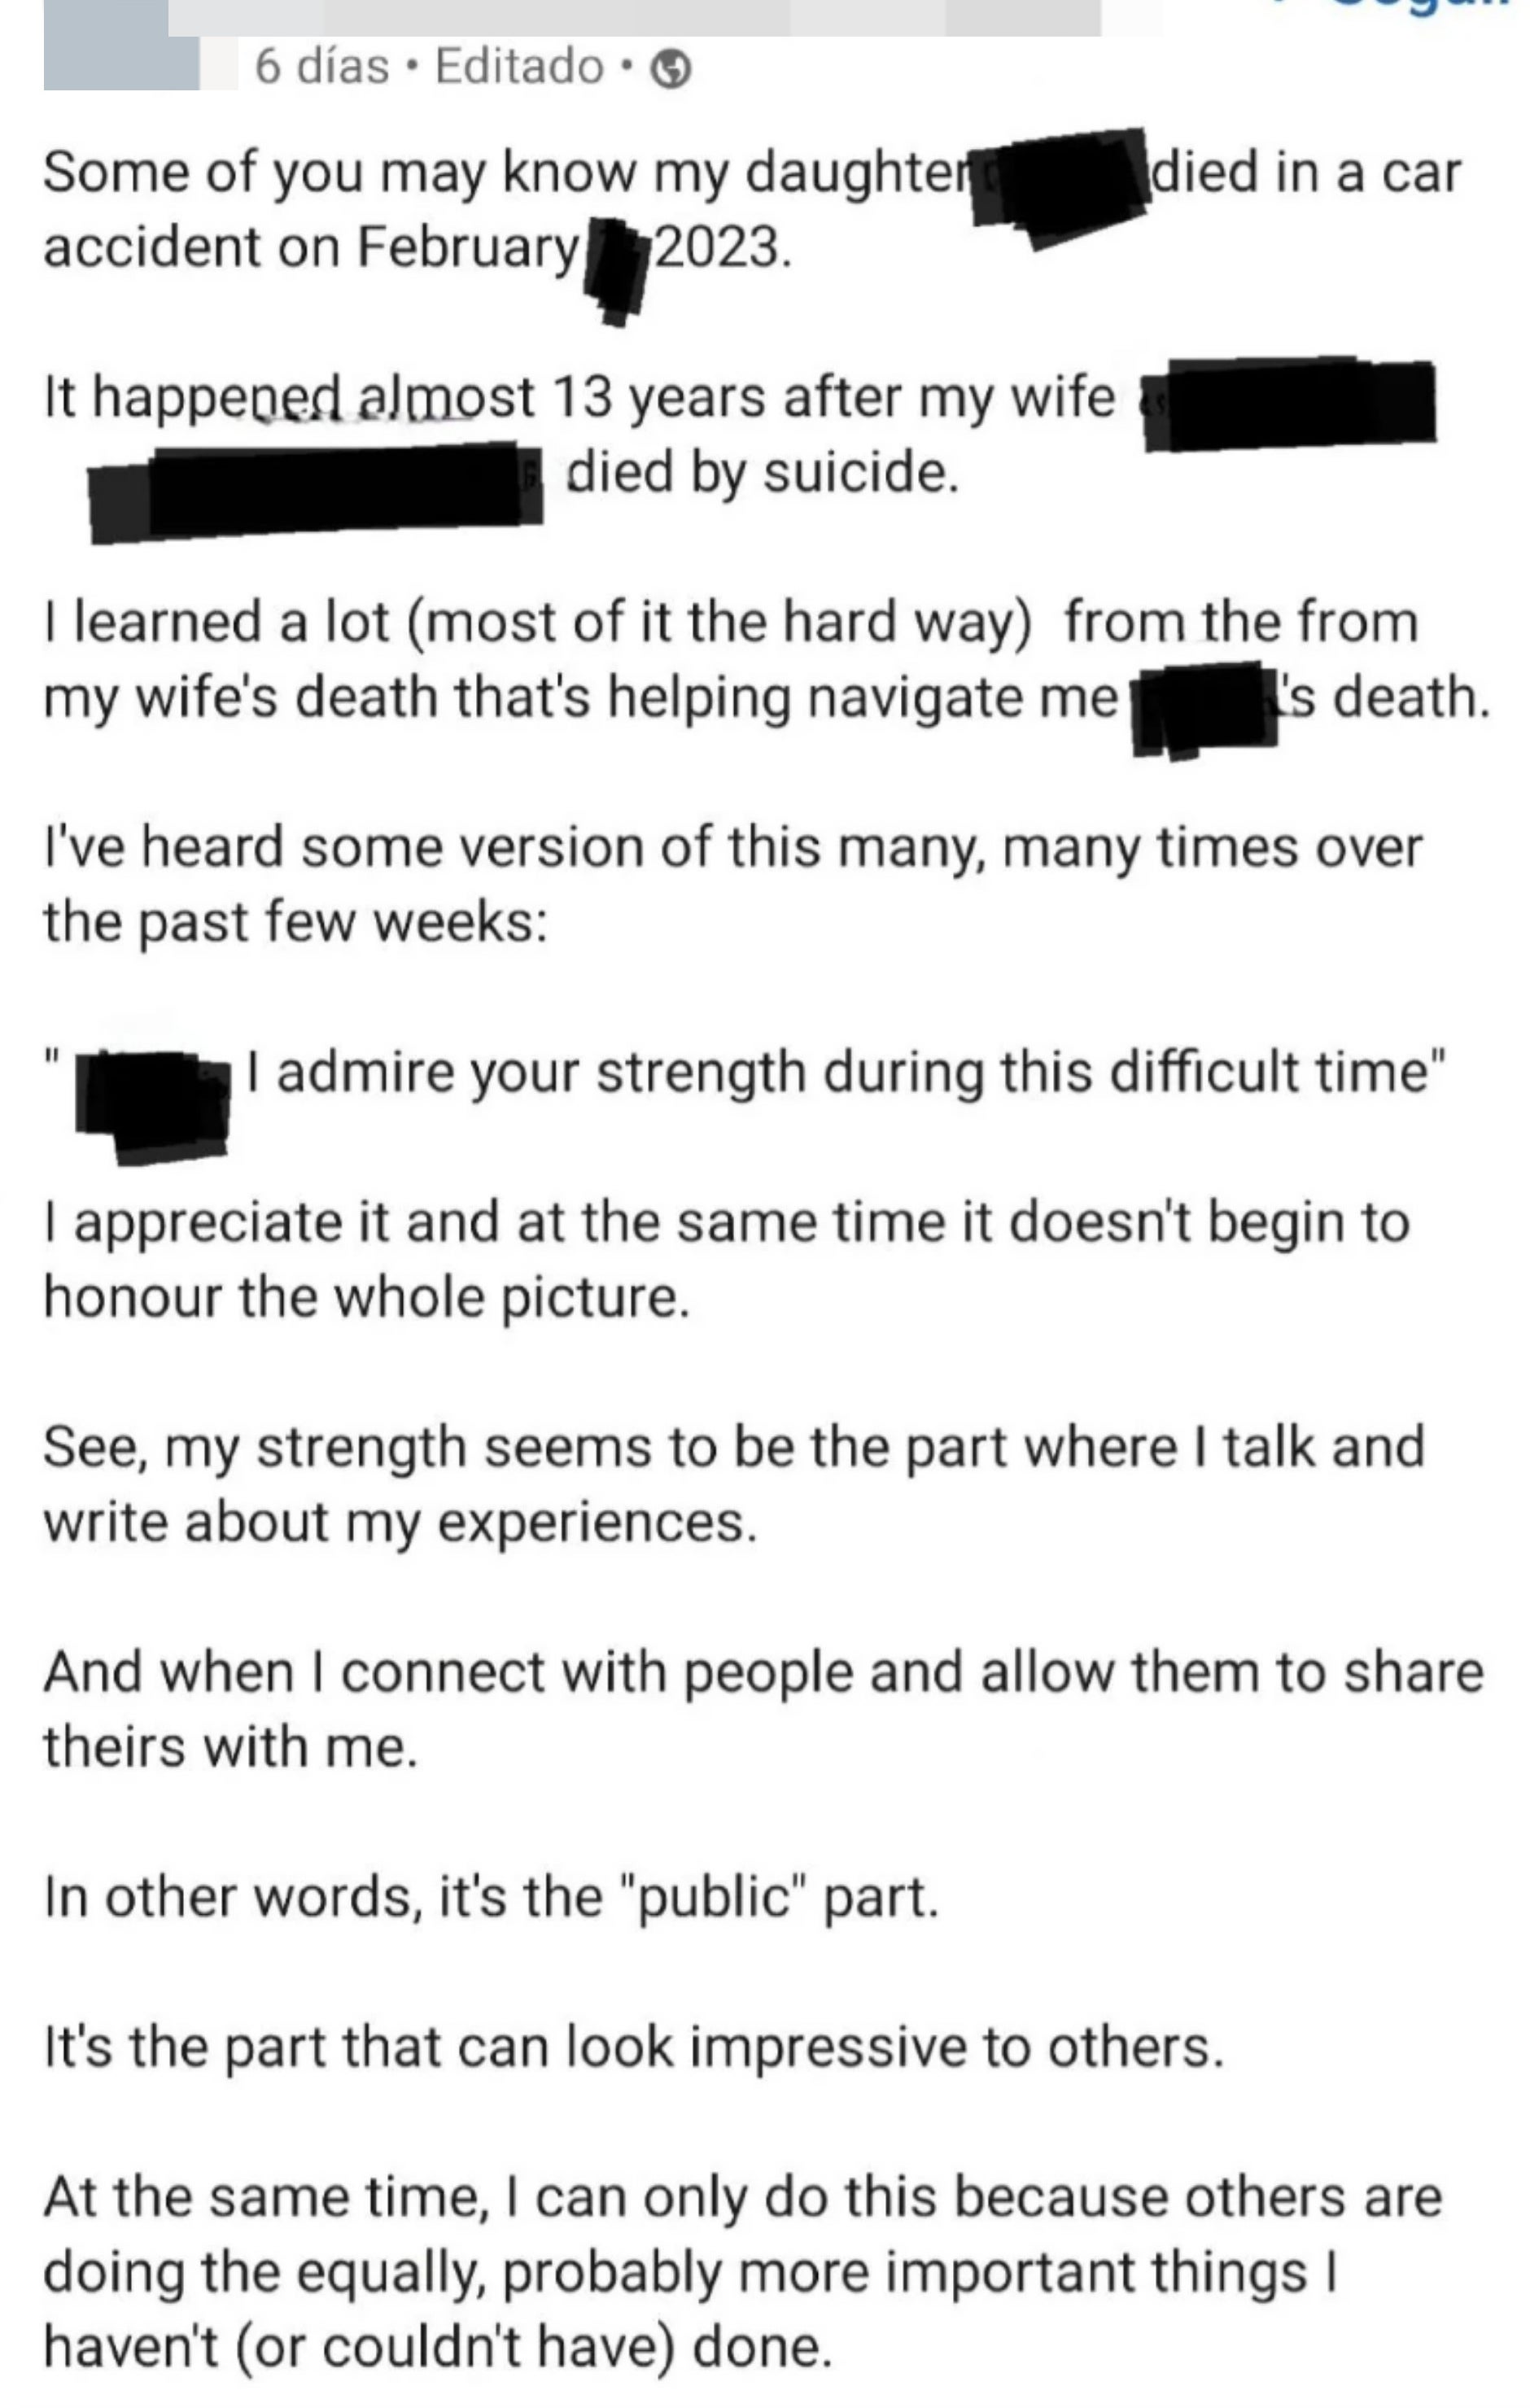 person oversharing about their family&#x27;s death and using it to say it&#x27;s a way for them to now connect to people